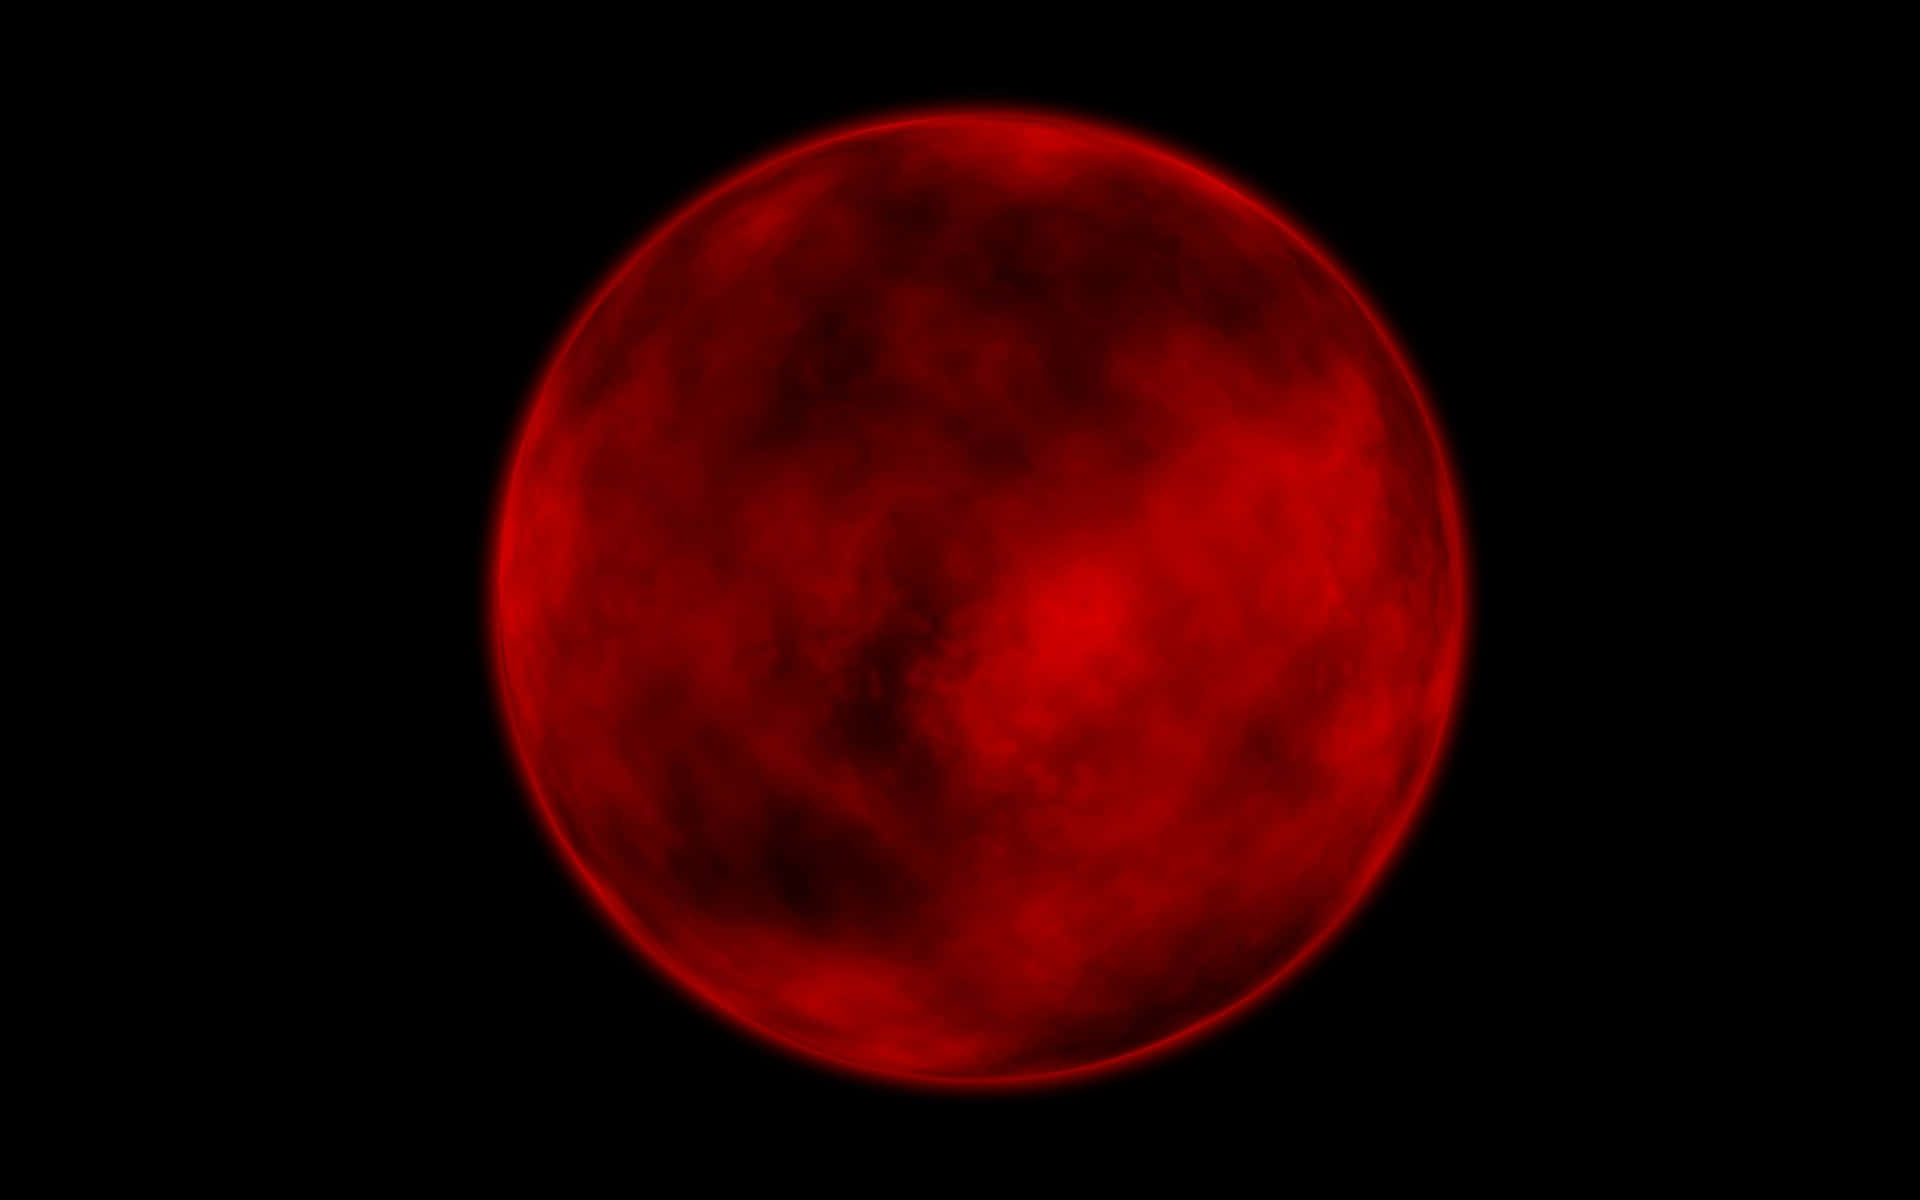 Free Blood Moon Wallpaper Downloads, [100+] Blood Moon Wallpapers for FREE  